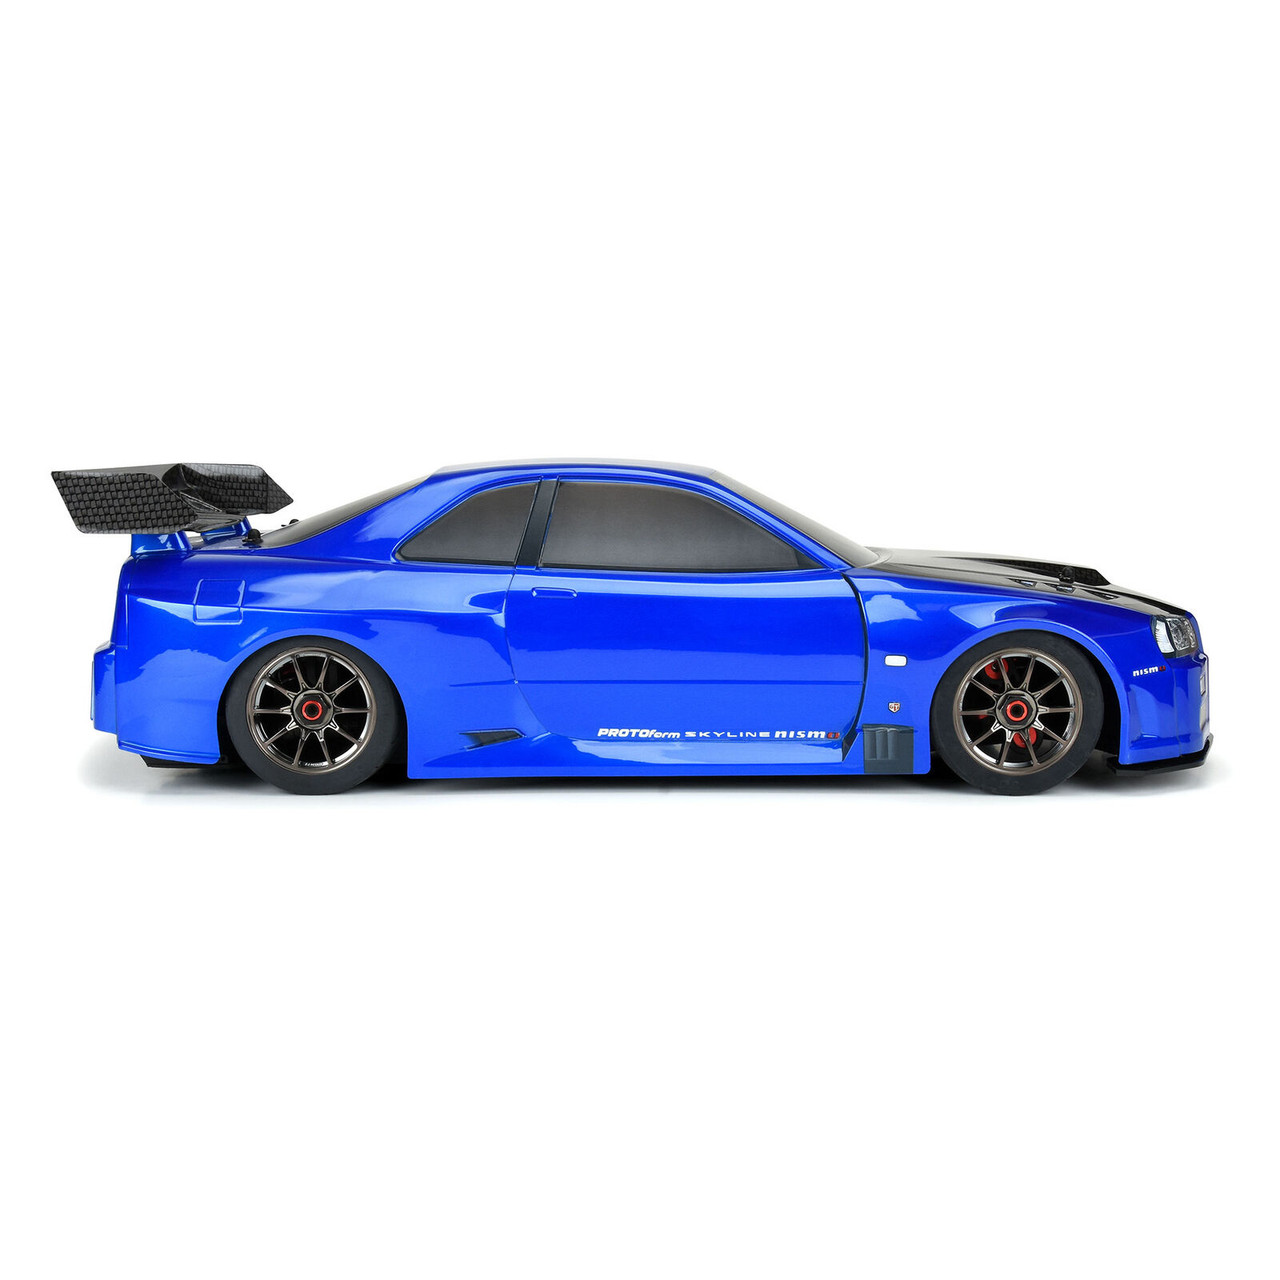 Protoform 1584-13 1/7 2002 Nissan Skyline GT-R R34 Painted Body (Blue): Infraction 6S